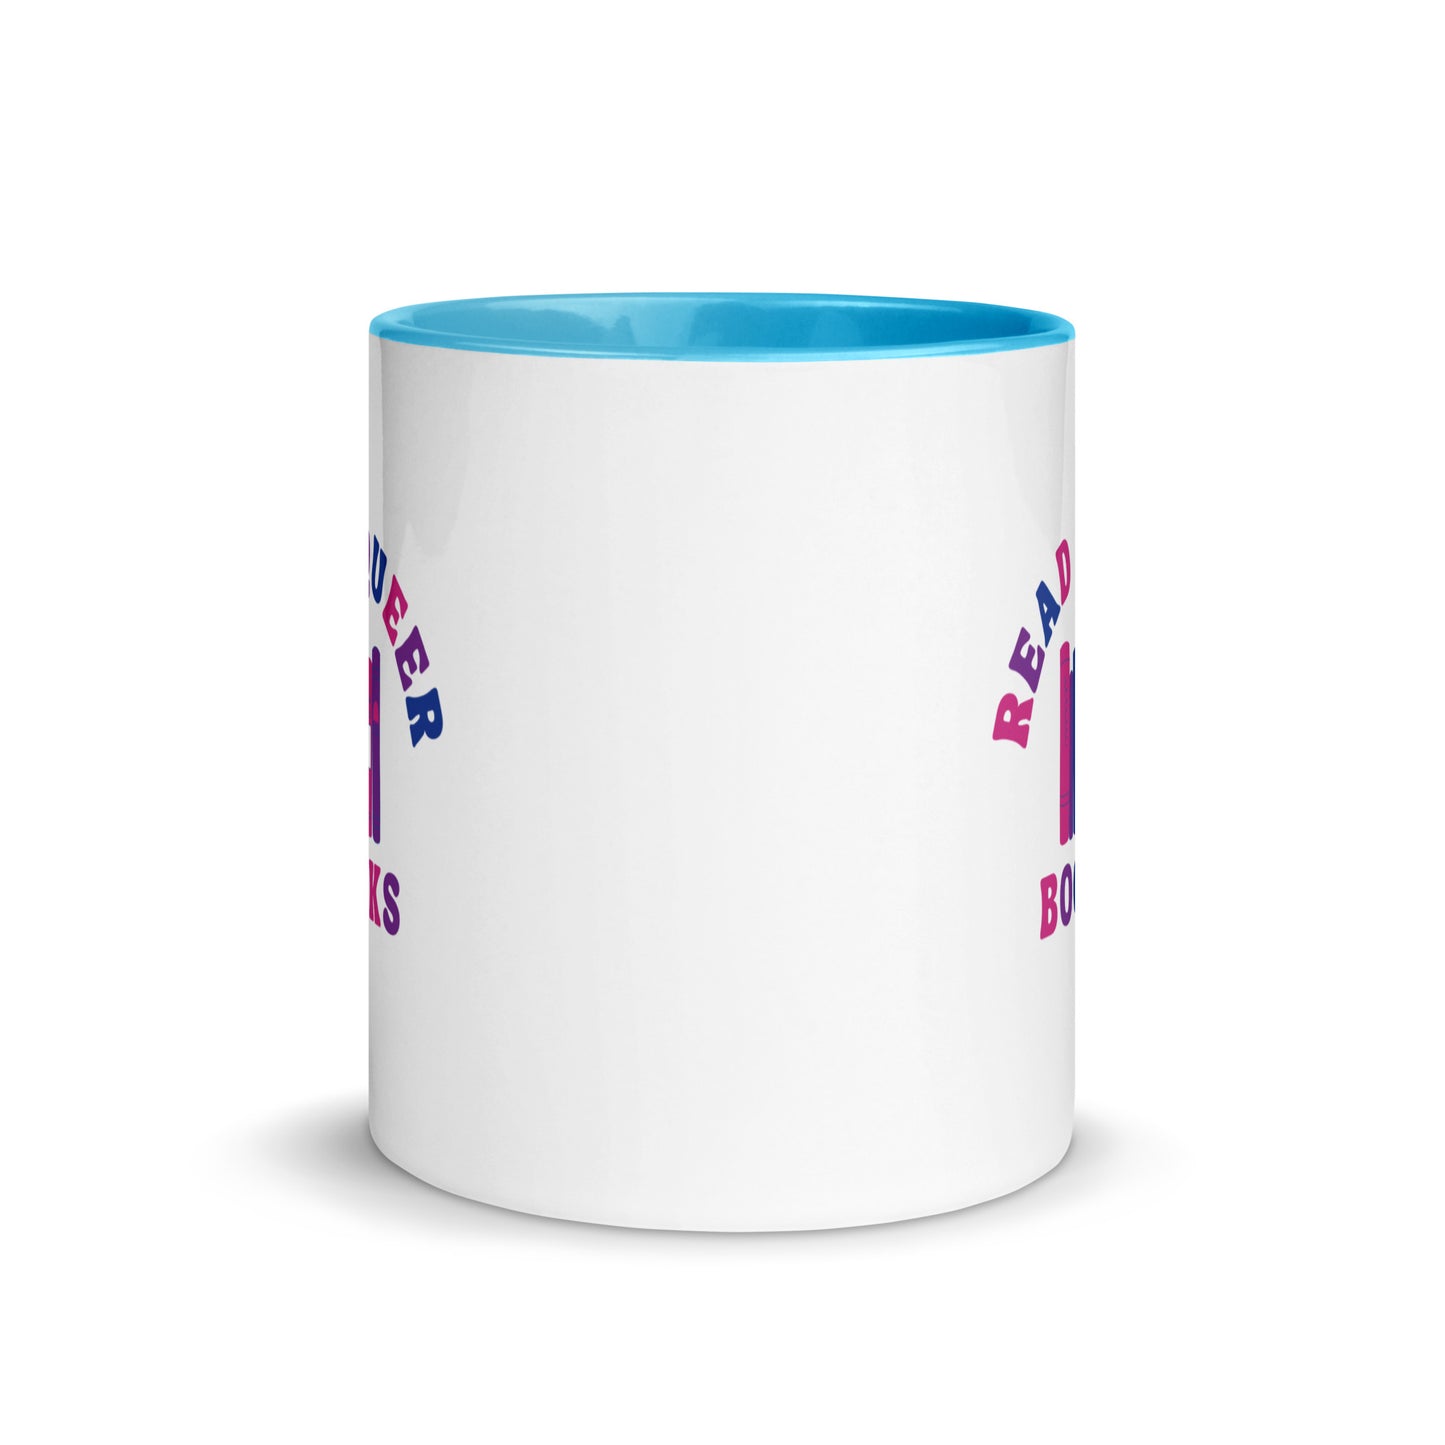 Read Queer Books (Bisexual Colors) Mug with Color Inside